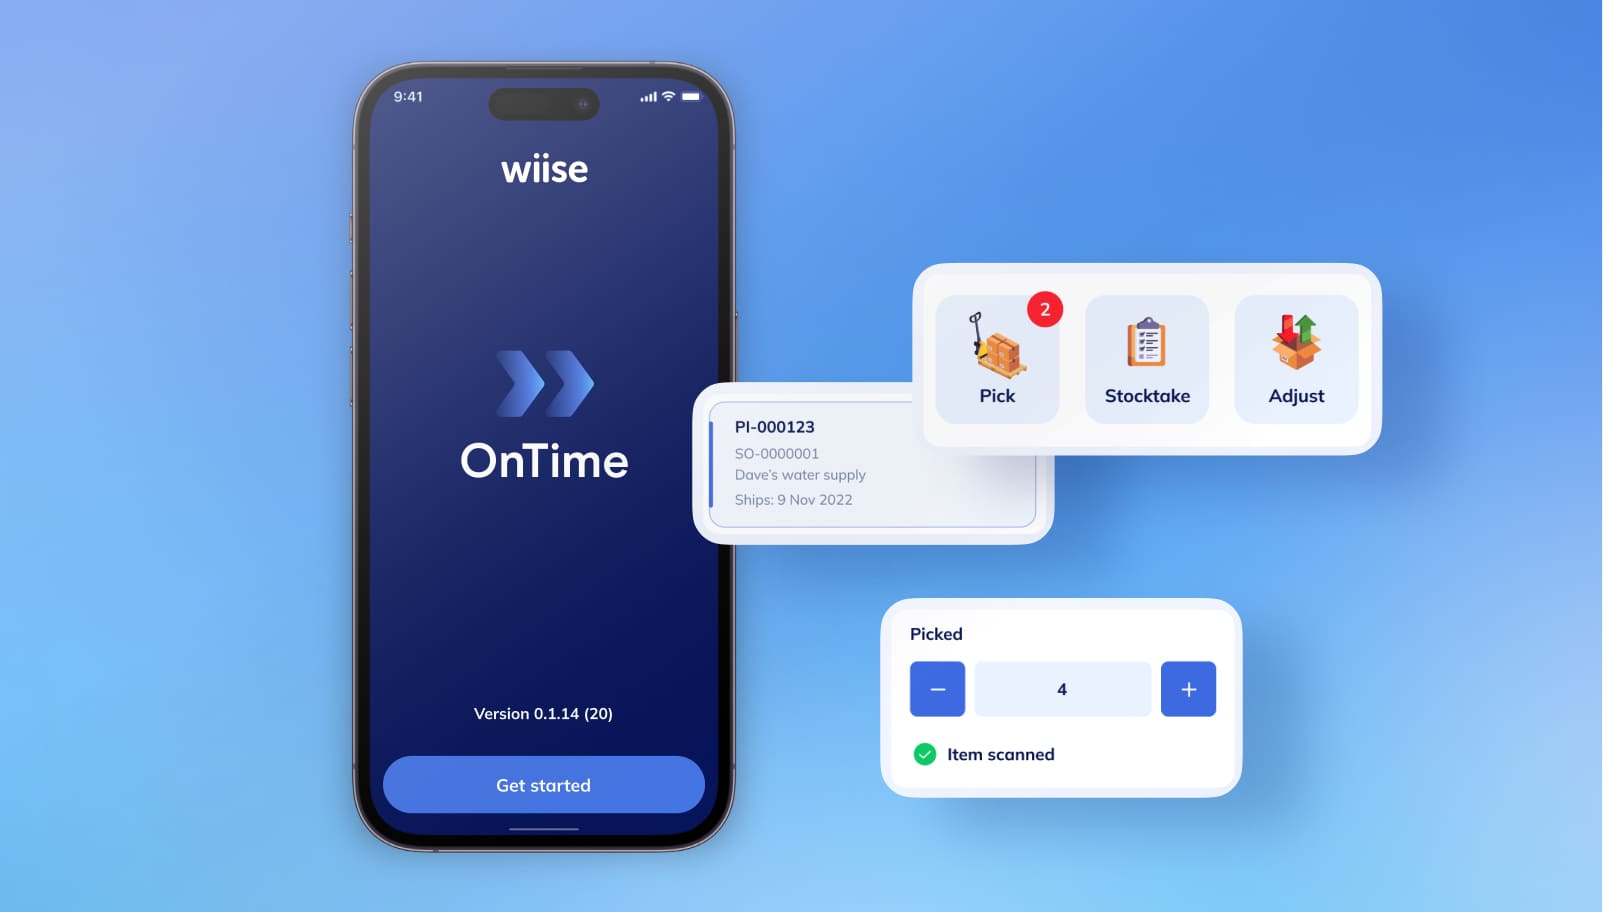 Wiise OnTime app with app features displayed next to it